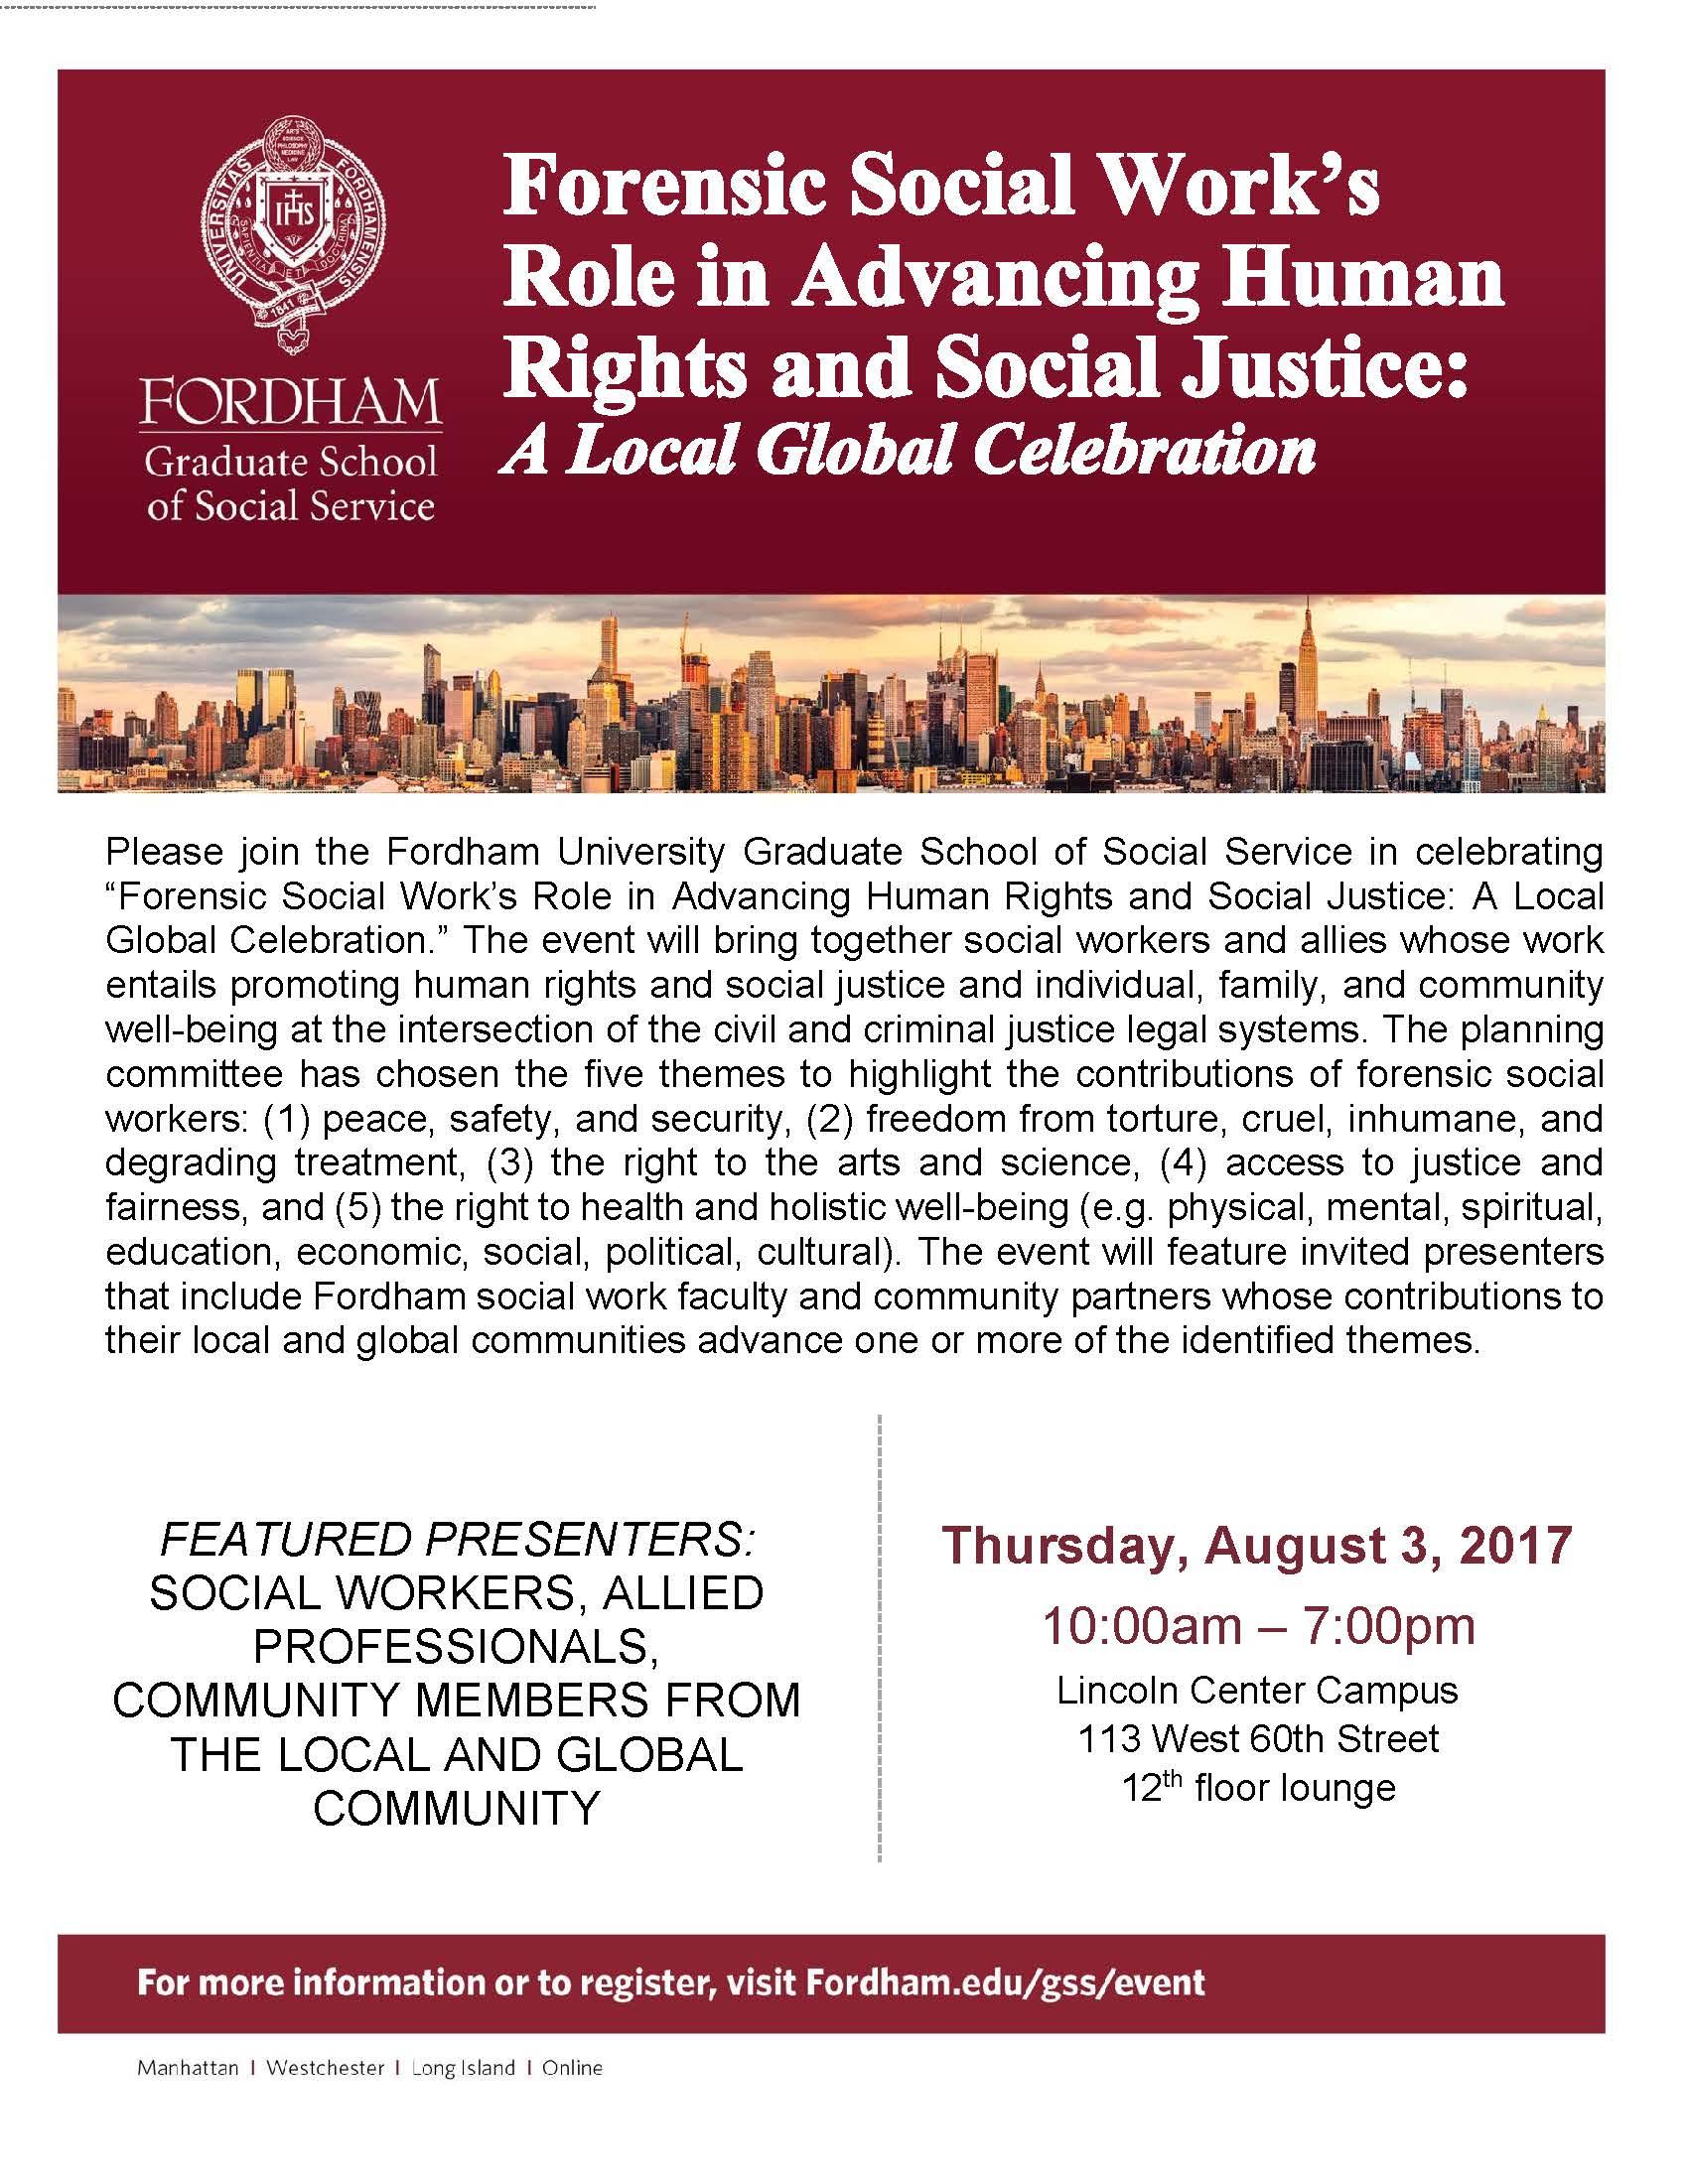 Forensic Social Work’s Role in Advancing Human Rights and Social Justice: A Local Global Celebration